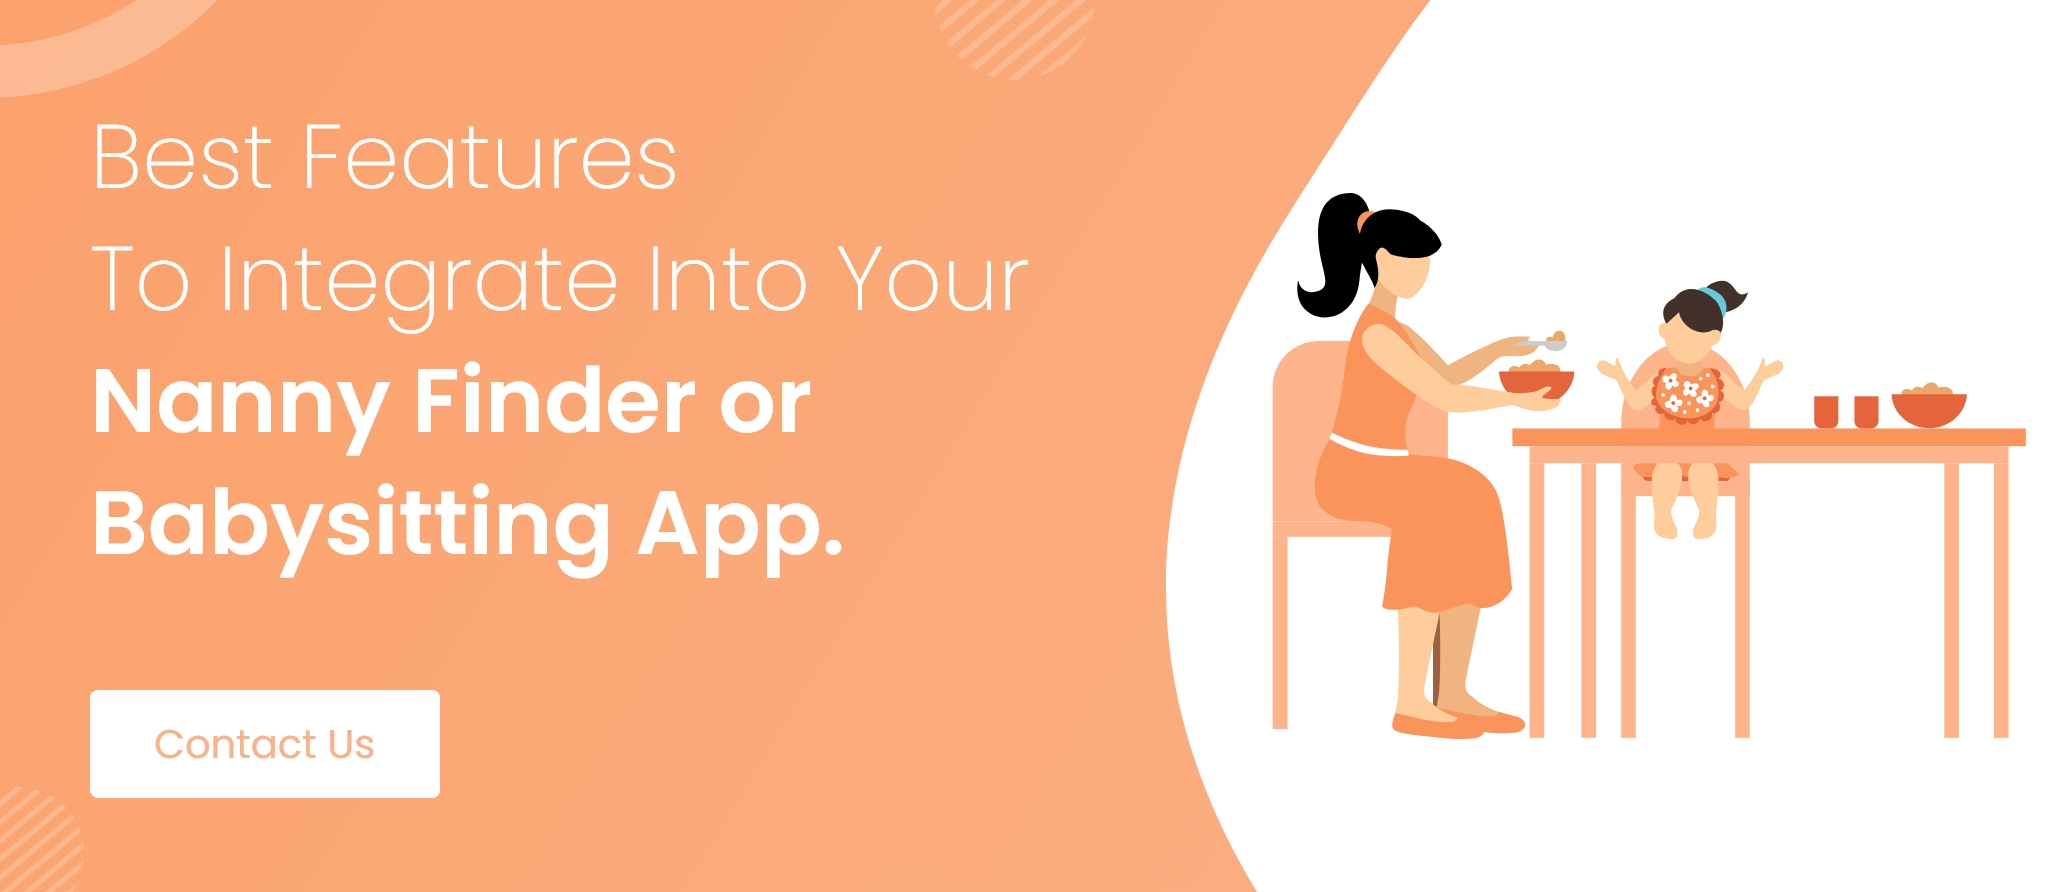 features of nanny finder app